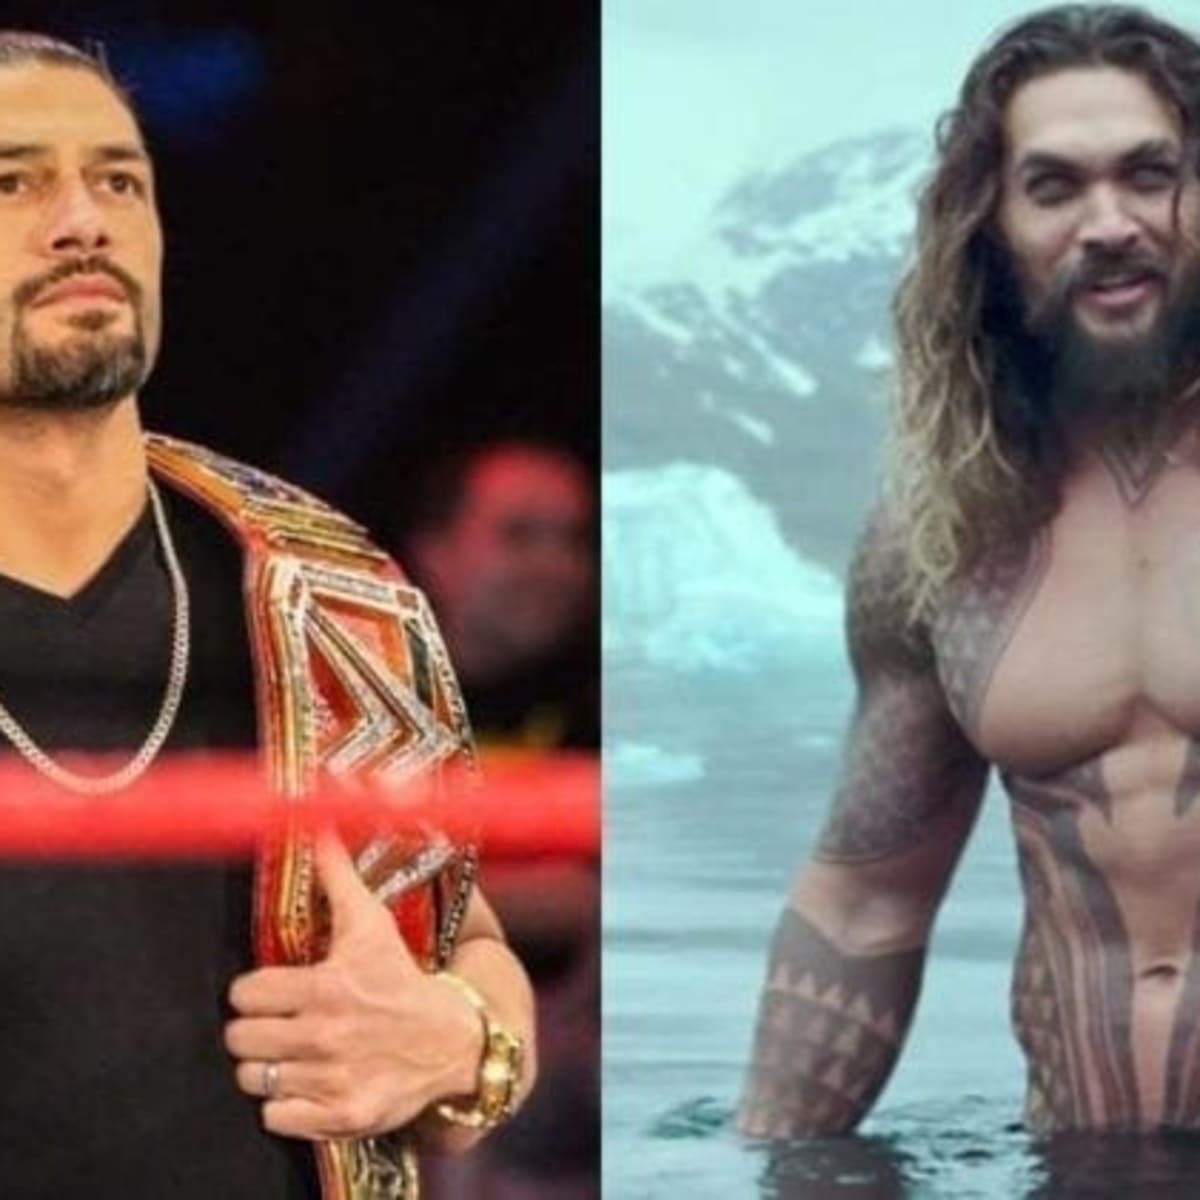 Roman Reigns Xxx Videos - Actor Jason Momoa comments on Roman Reigns comparisons - Wrestling News |  WWE and AEW Results, Spoilers, Rumors & Scoops